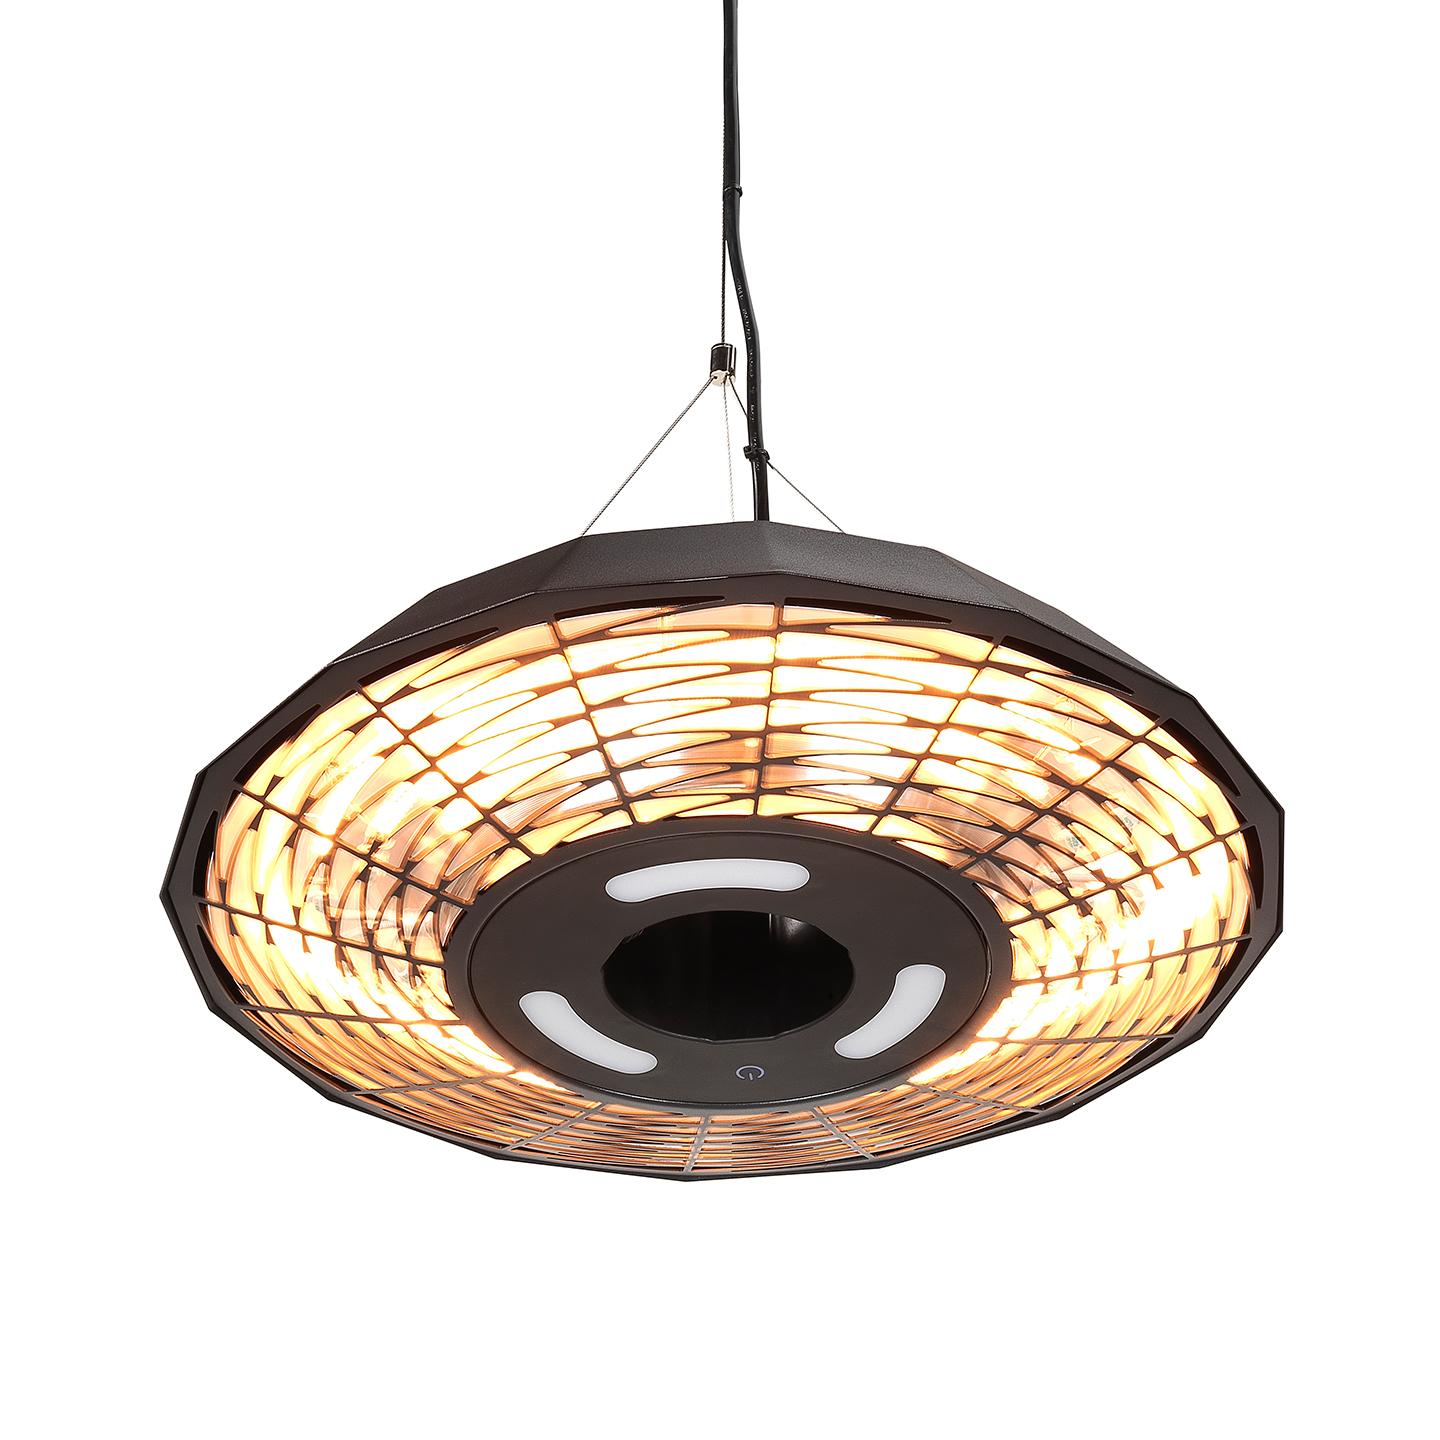 Diffusion Pendant 2.0kW Hanging Lamp with lights